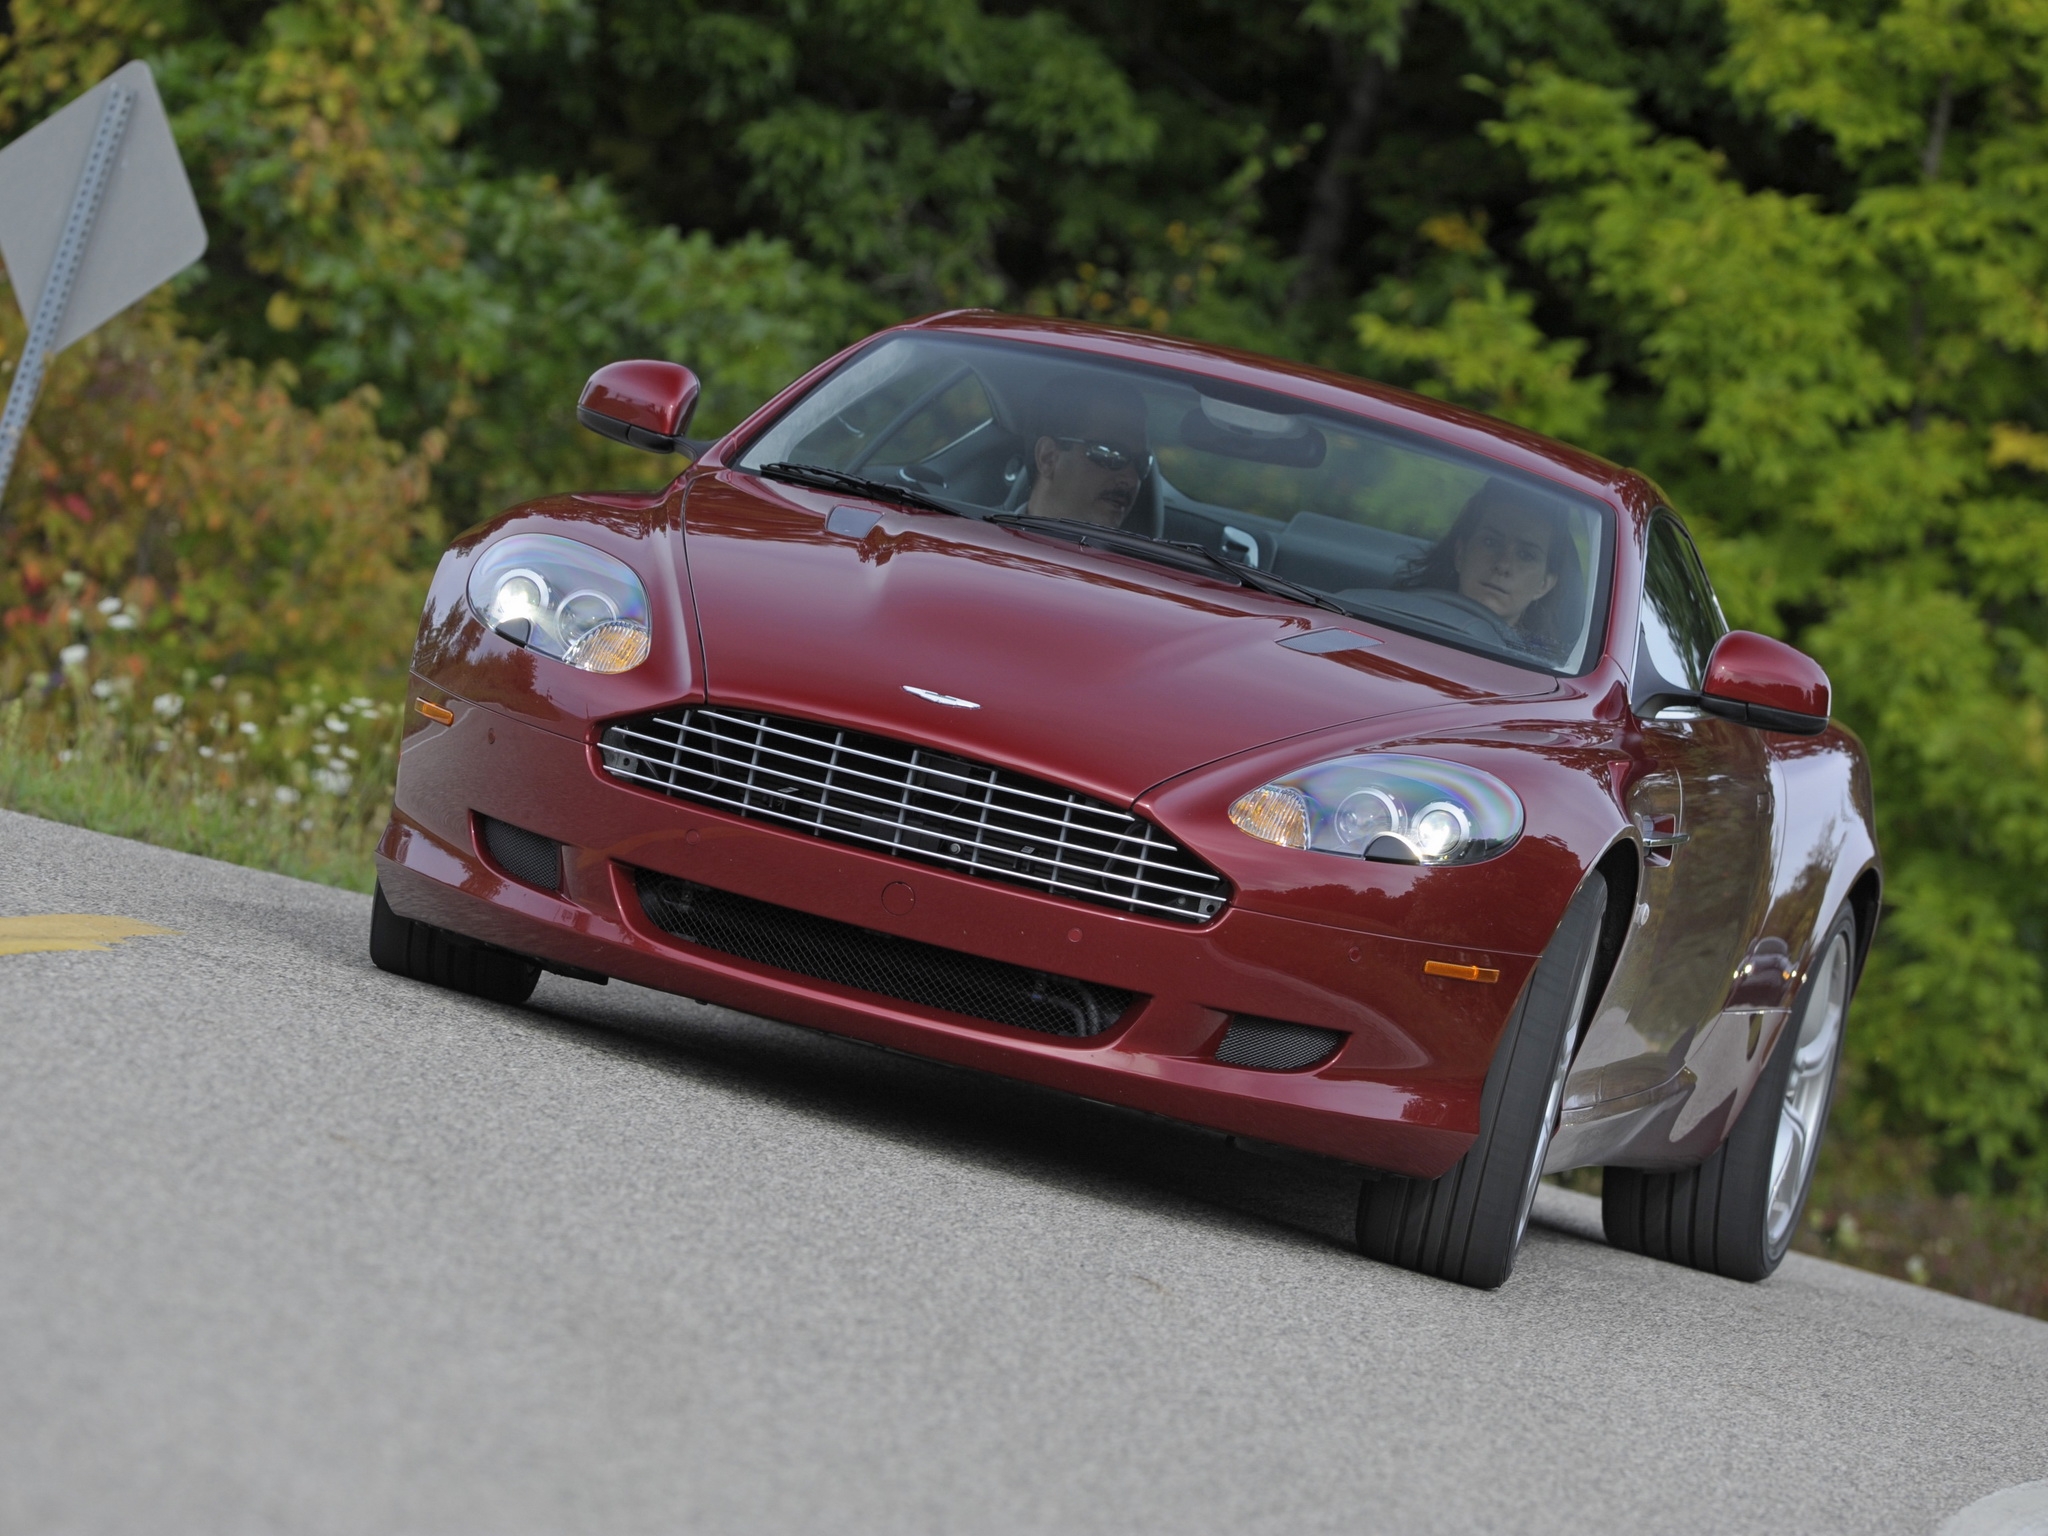 auto, nature, trees, grass, aston martin, cars, red, front view, style, sign, 2008, aston martin db9 Full HD